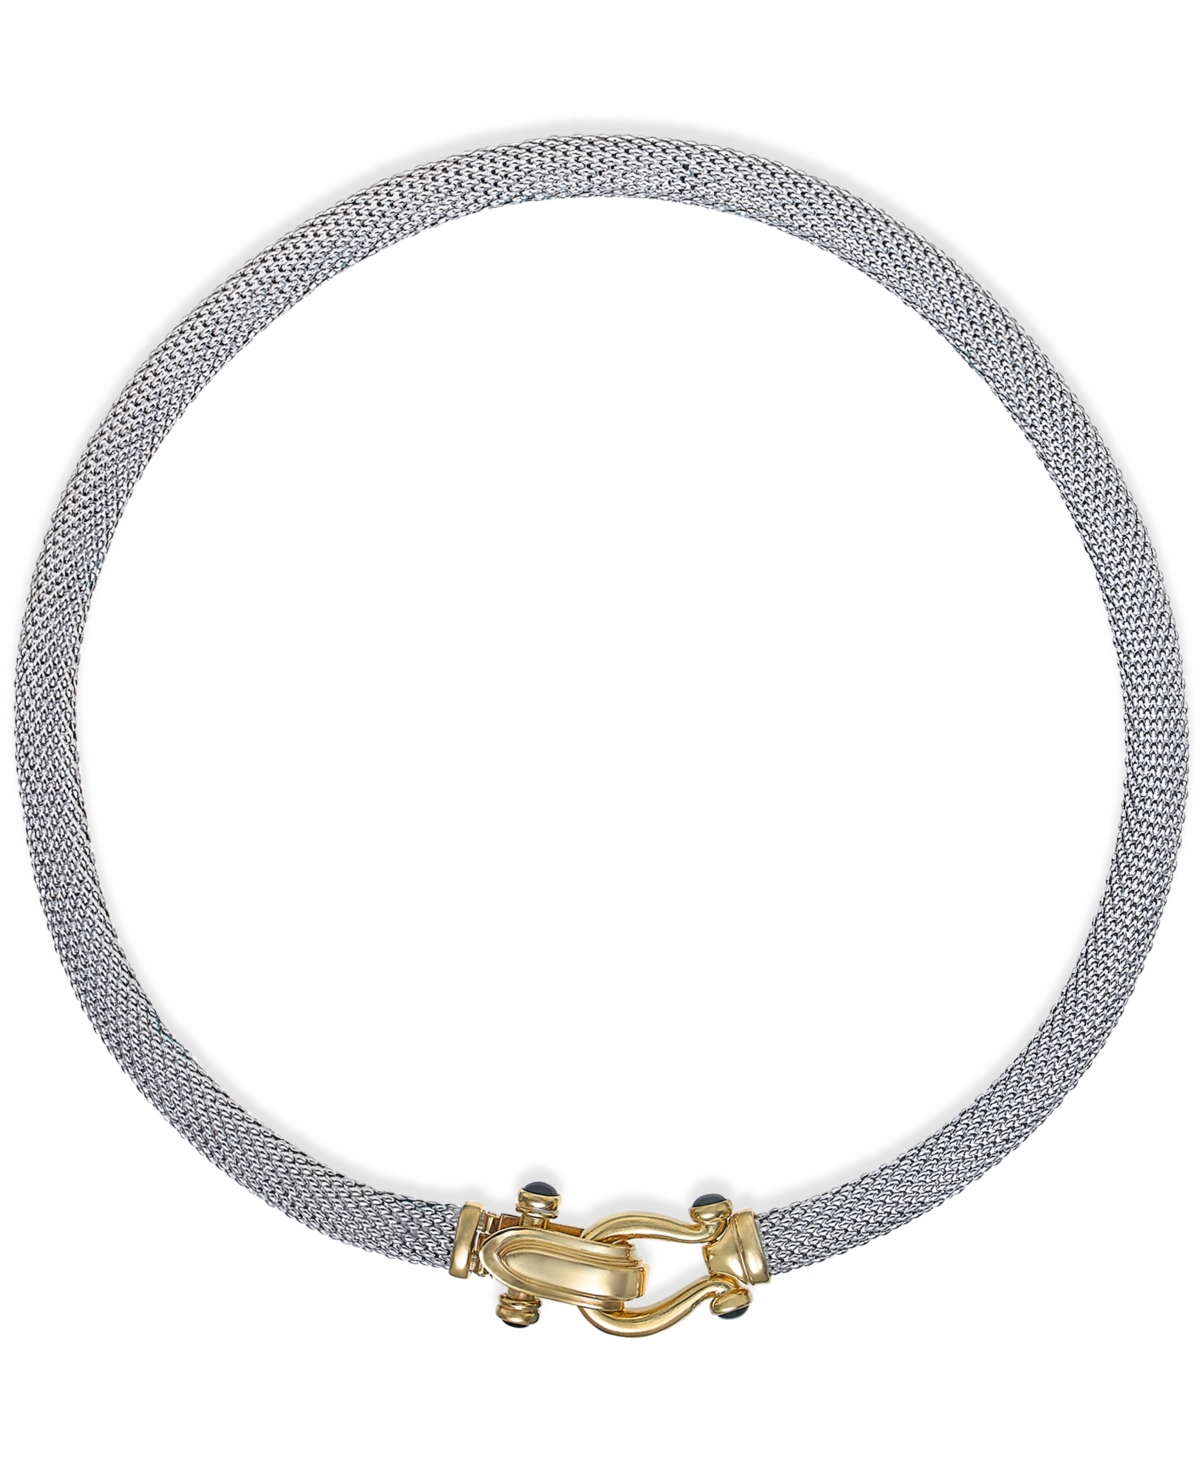 Rounded Mesh Collar Necklace in 14k Gold over Sterling Silver - Two-Tone